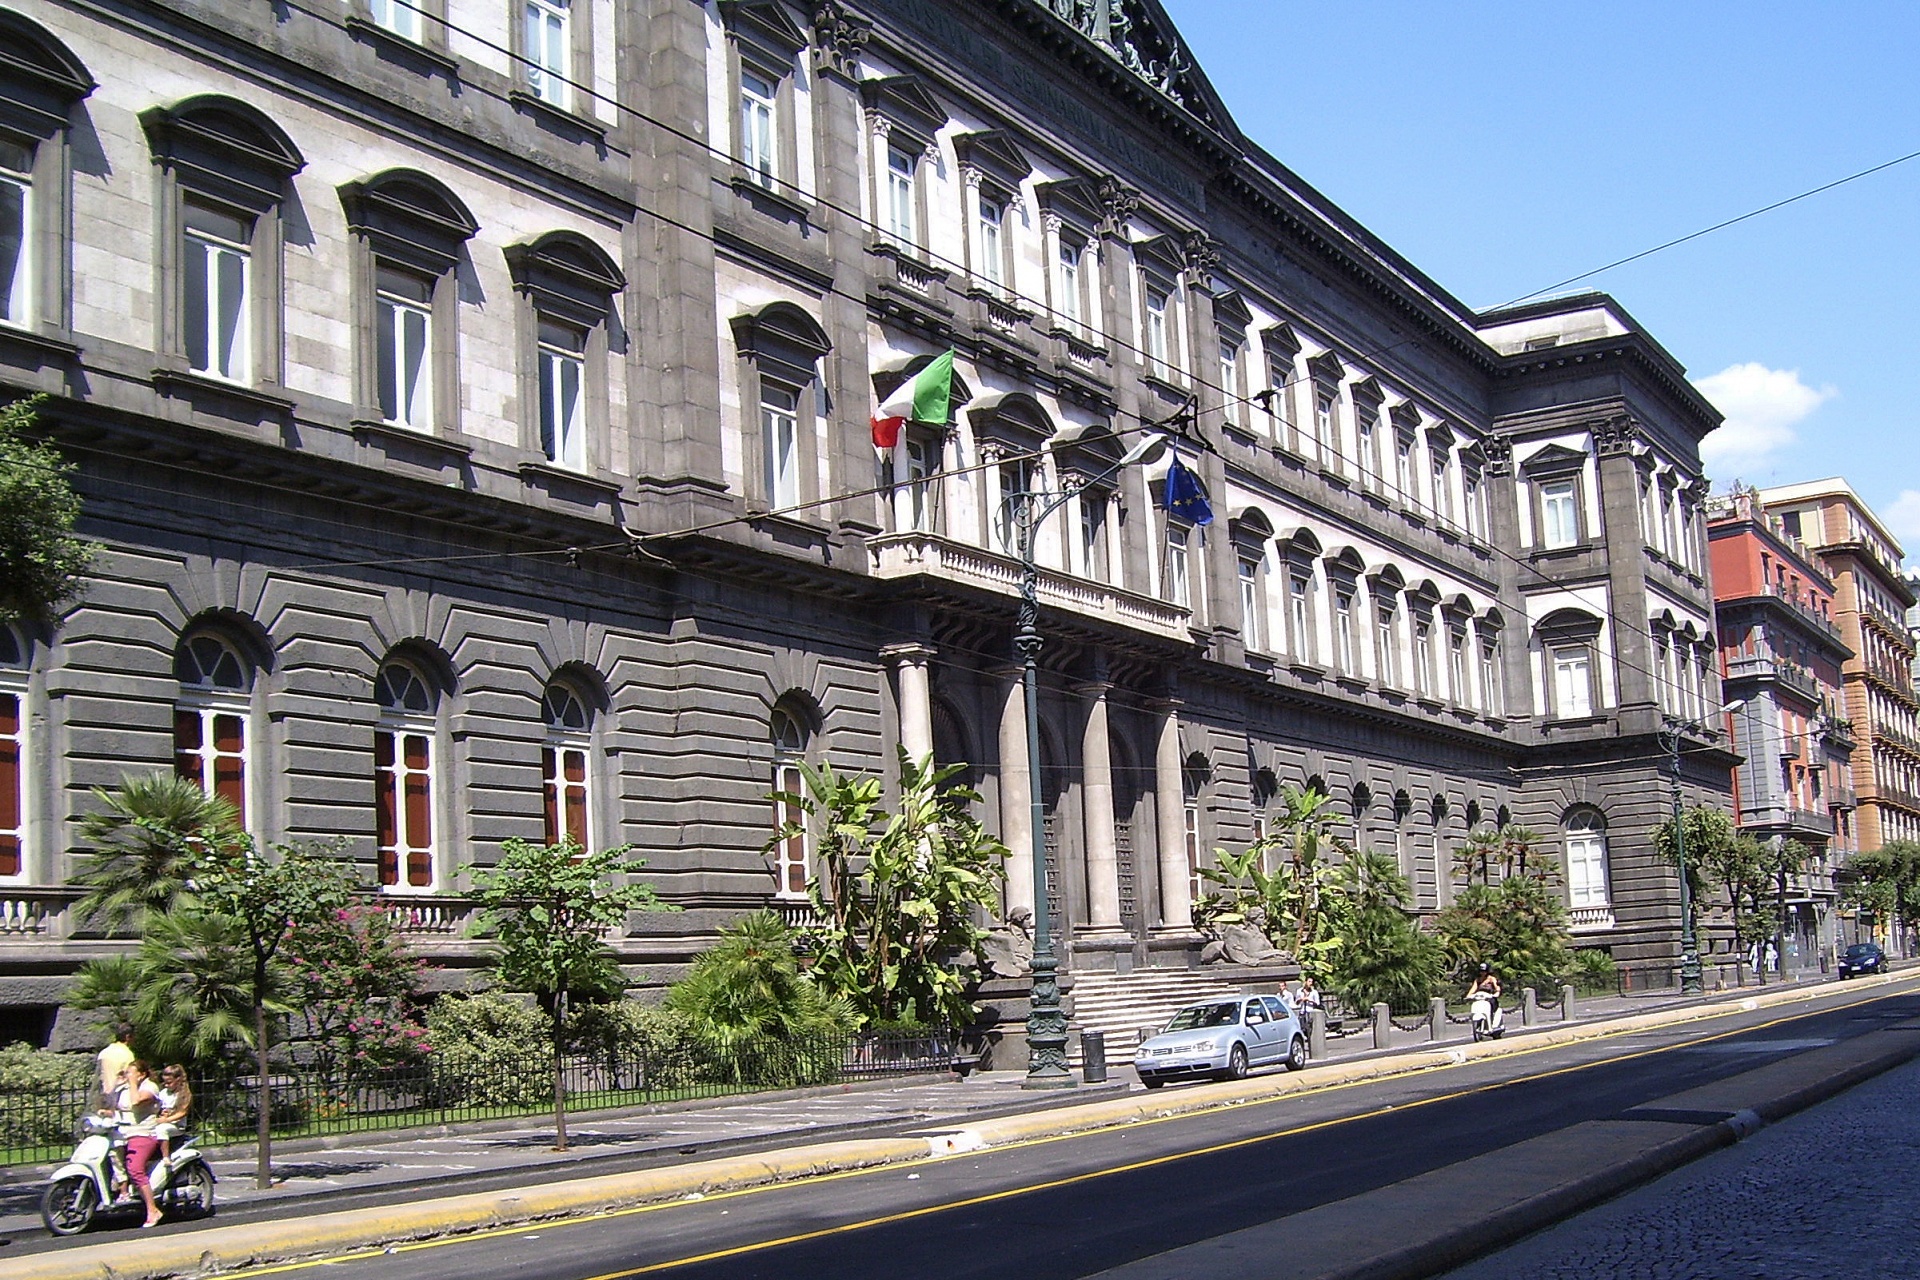 Federico II University: Federico II is the oldest secular and state university in the world